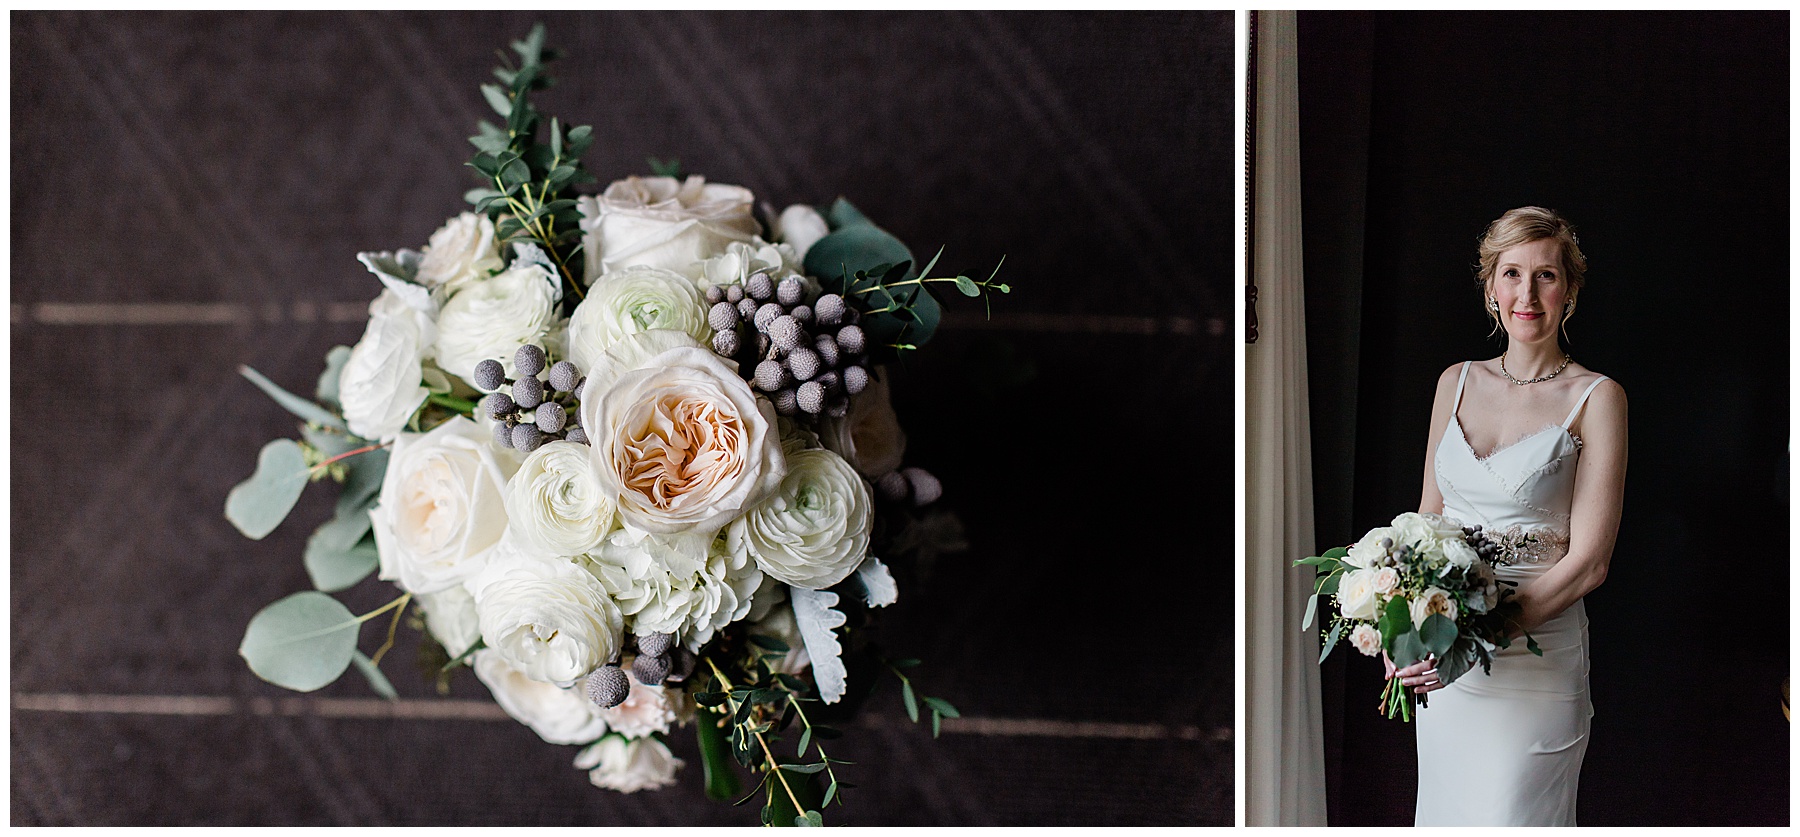 bridal bouquet featuring white and light pink roses with dark greenery